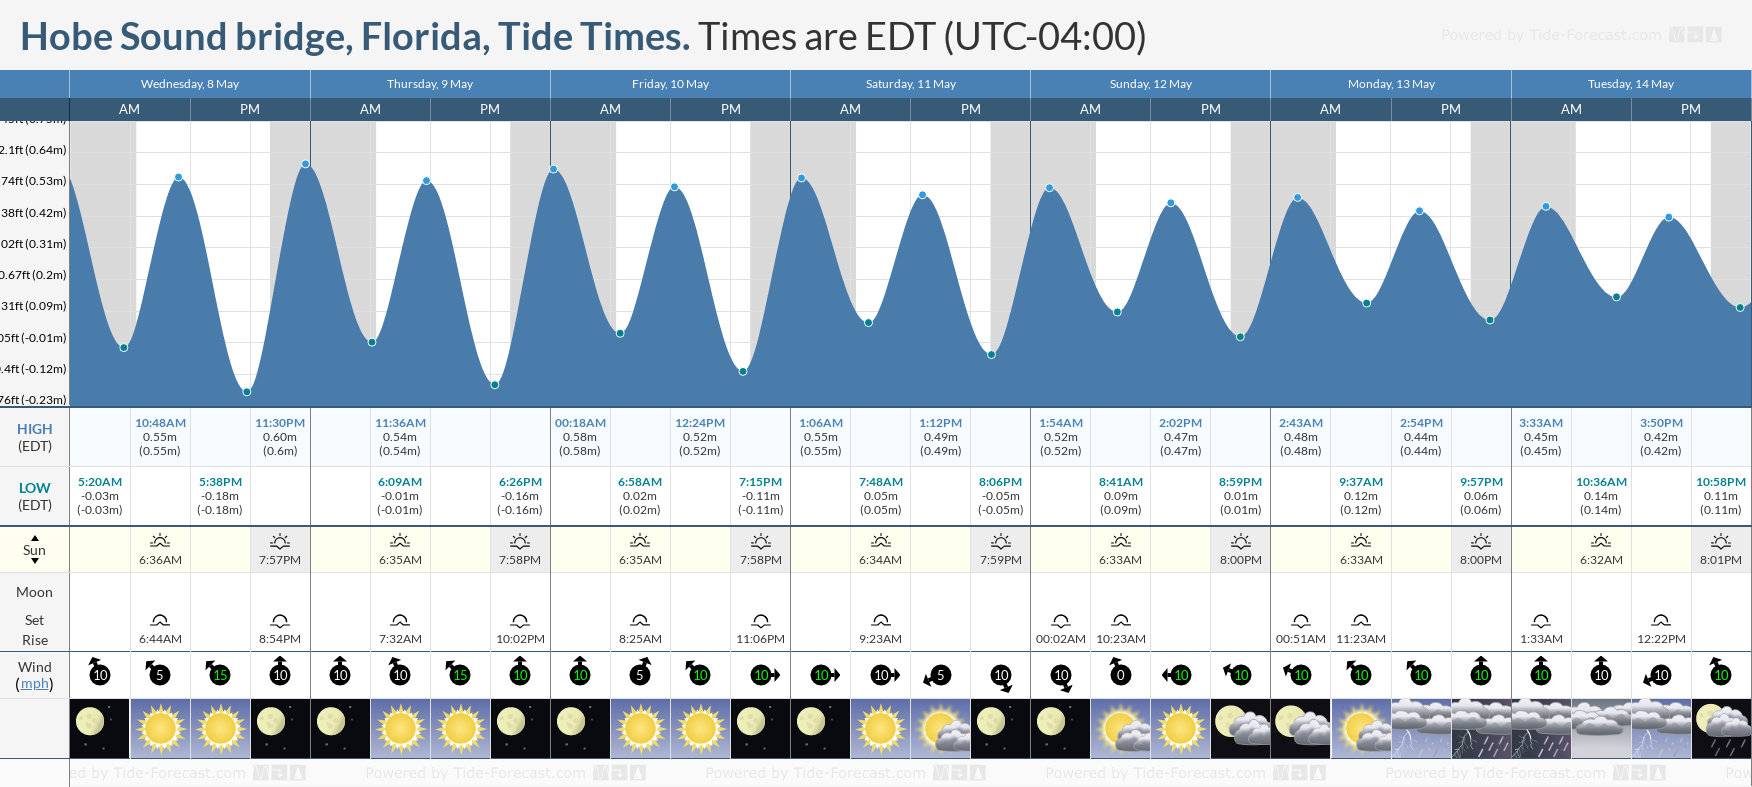 Hobe Sound bridge, Florida Tide Chart including high and low tide times for the next 7 days